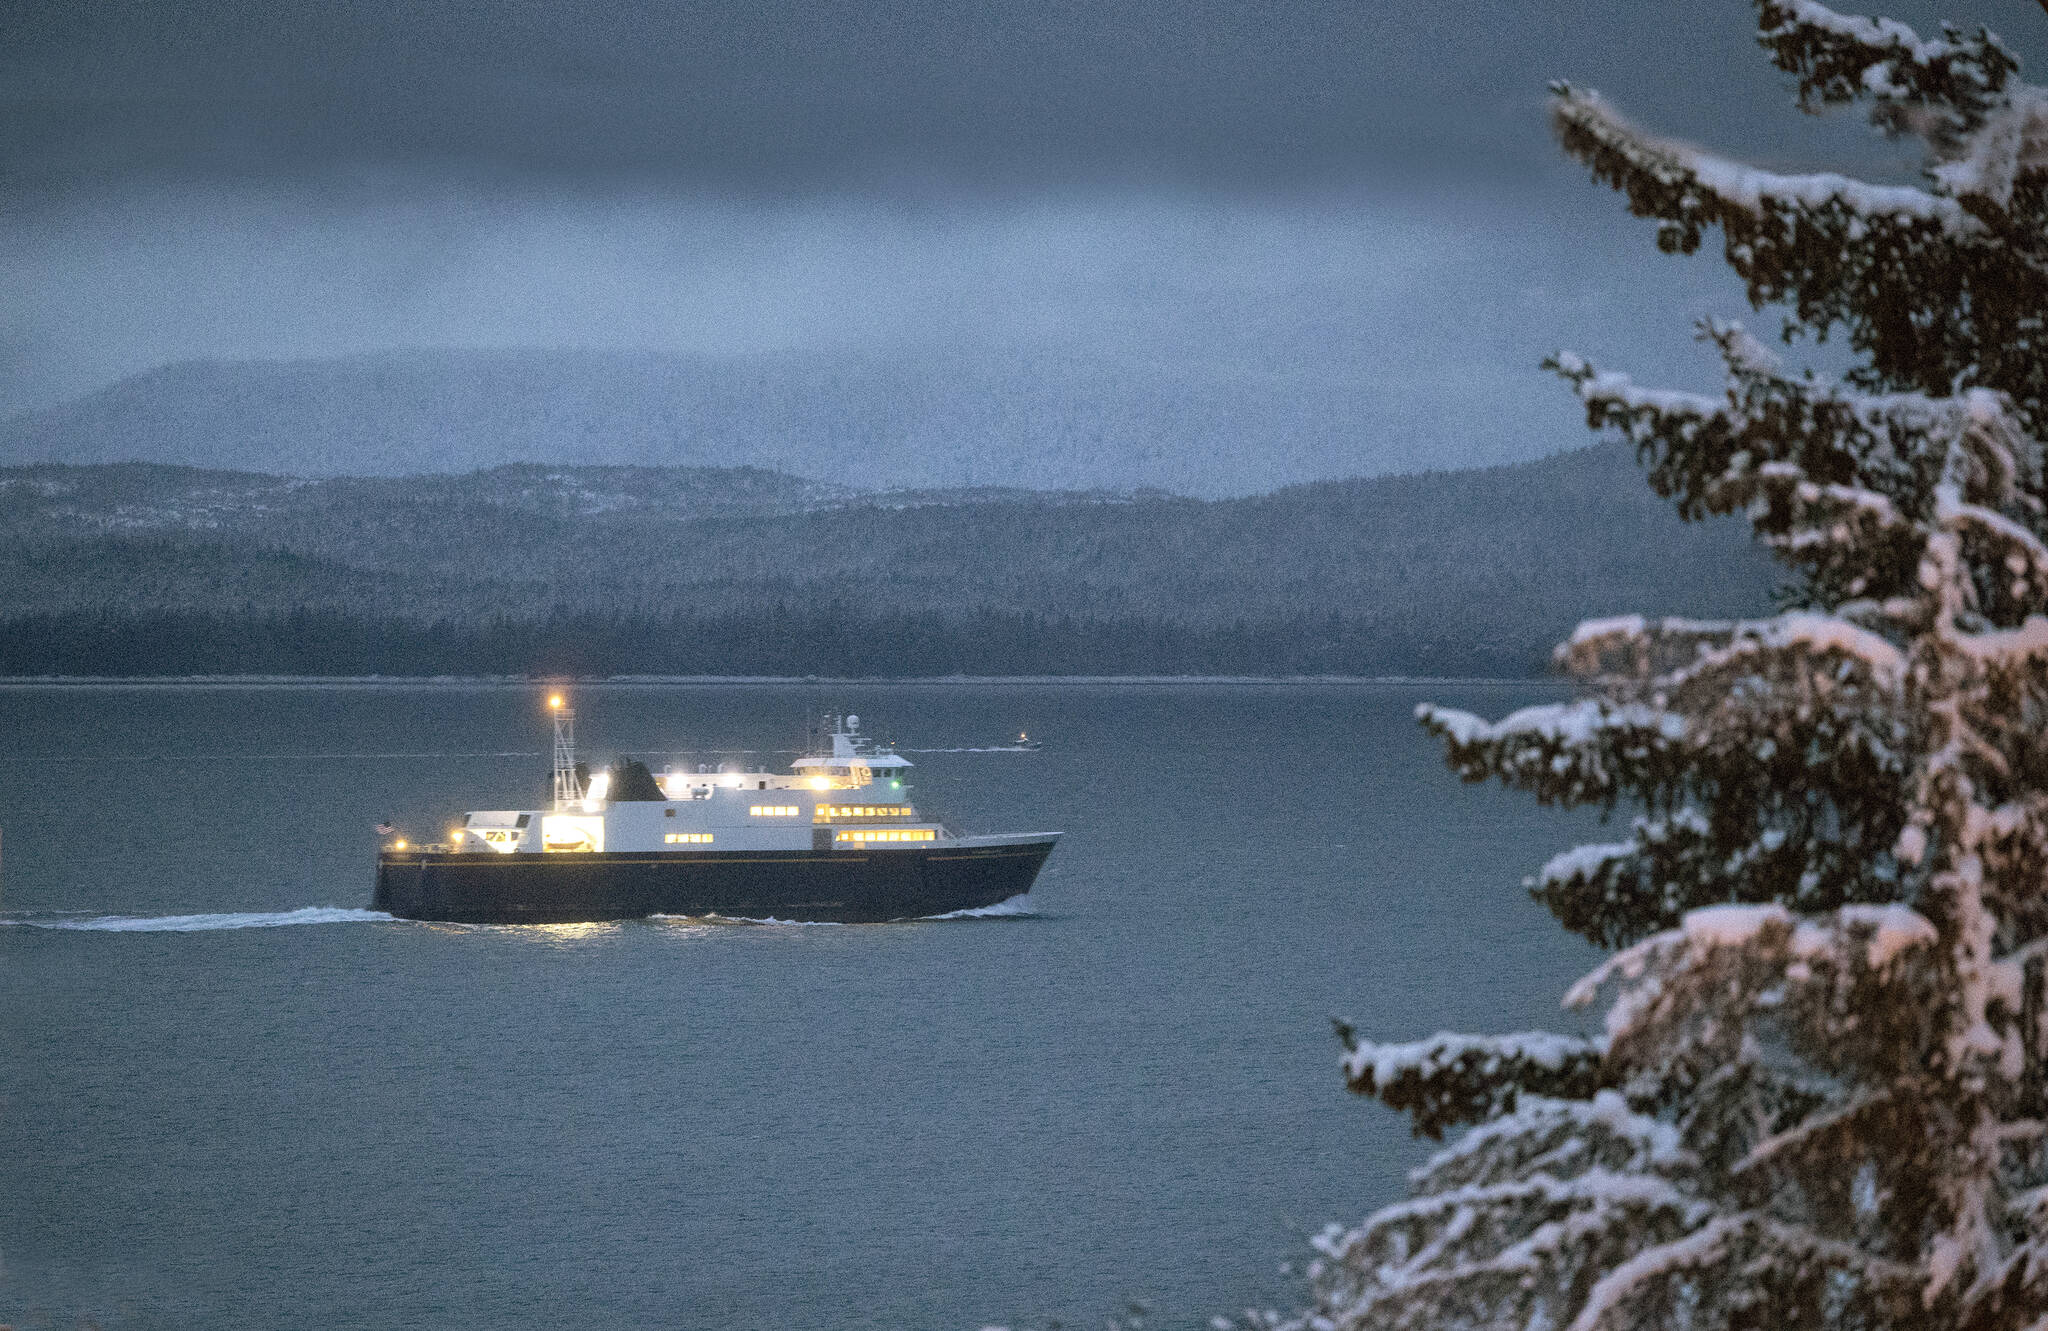 The Alaska Marine Highway System ferry Tazlina heads up to Haines and Skagway on the morning of Dec. 10 near south Shelter Island. (Courtesy photo / Kenneth Gill, gillfoto)